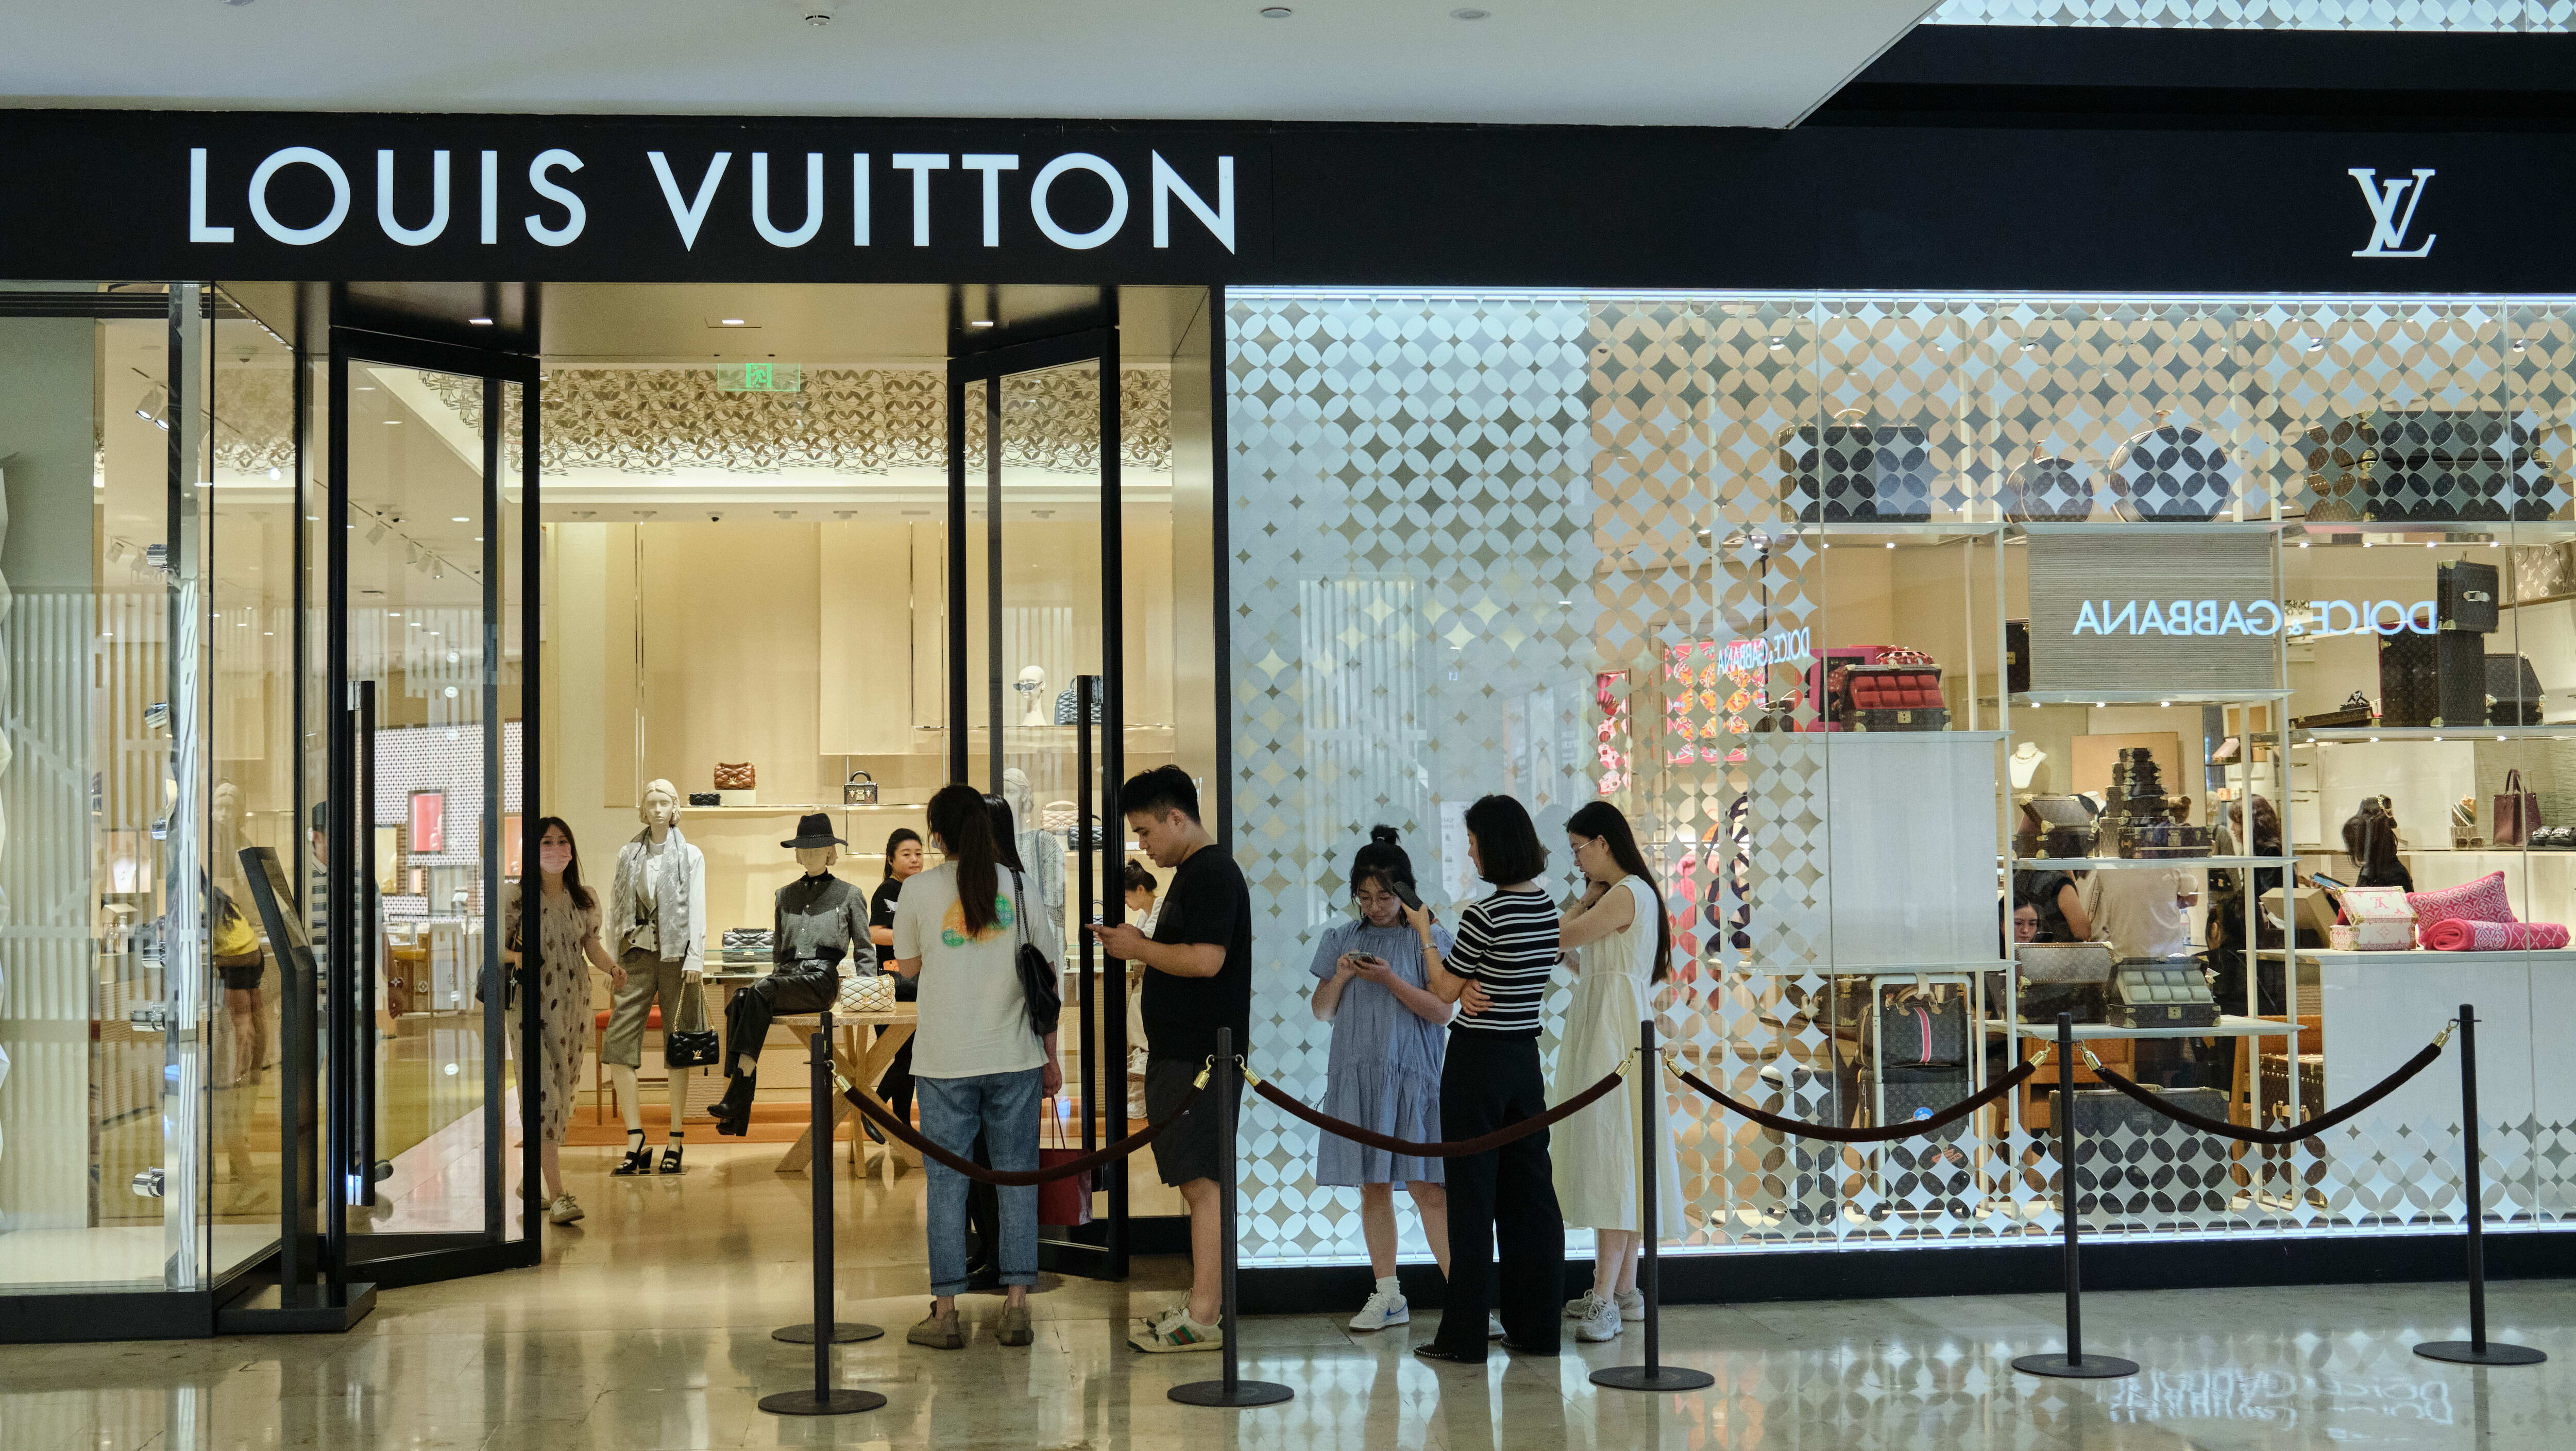 Do the really rich buy stuff from LVMH, Richemont and Kering